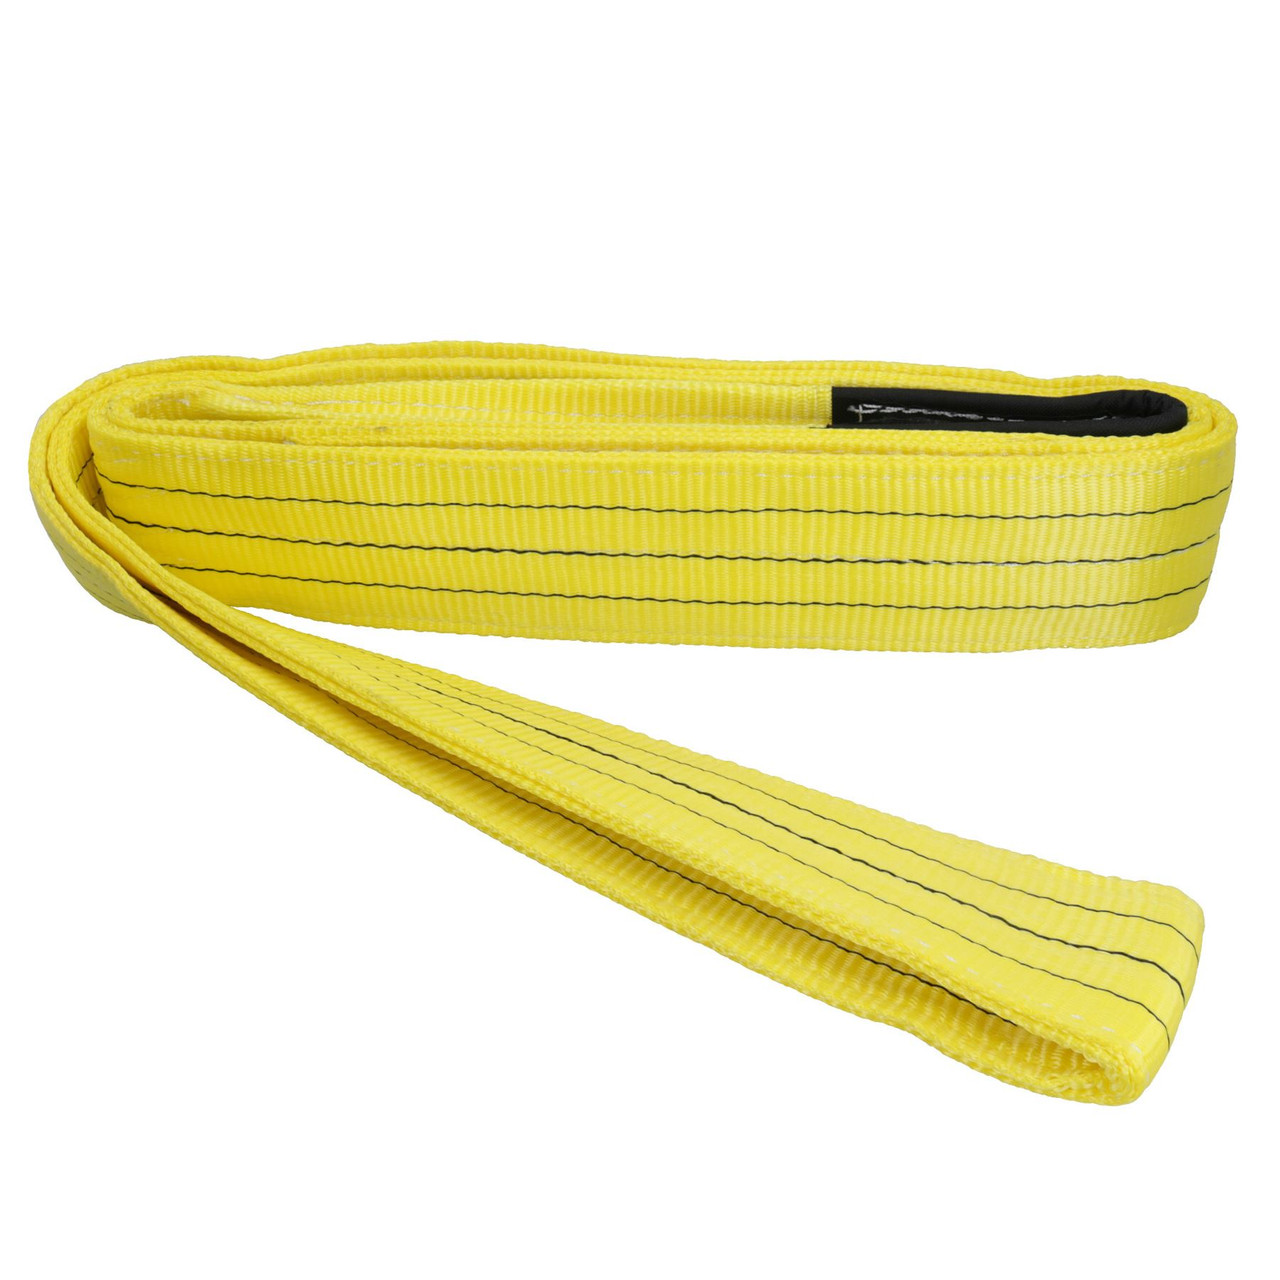 3 Ton Webbing Sling Recovery Strap Tow Rope Snatch 4 Metres x 90mm Wide